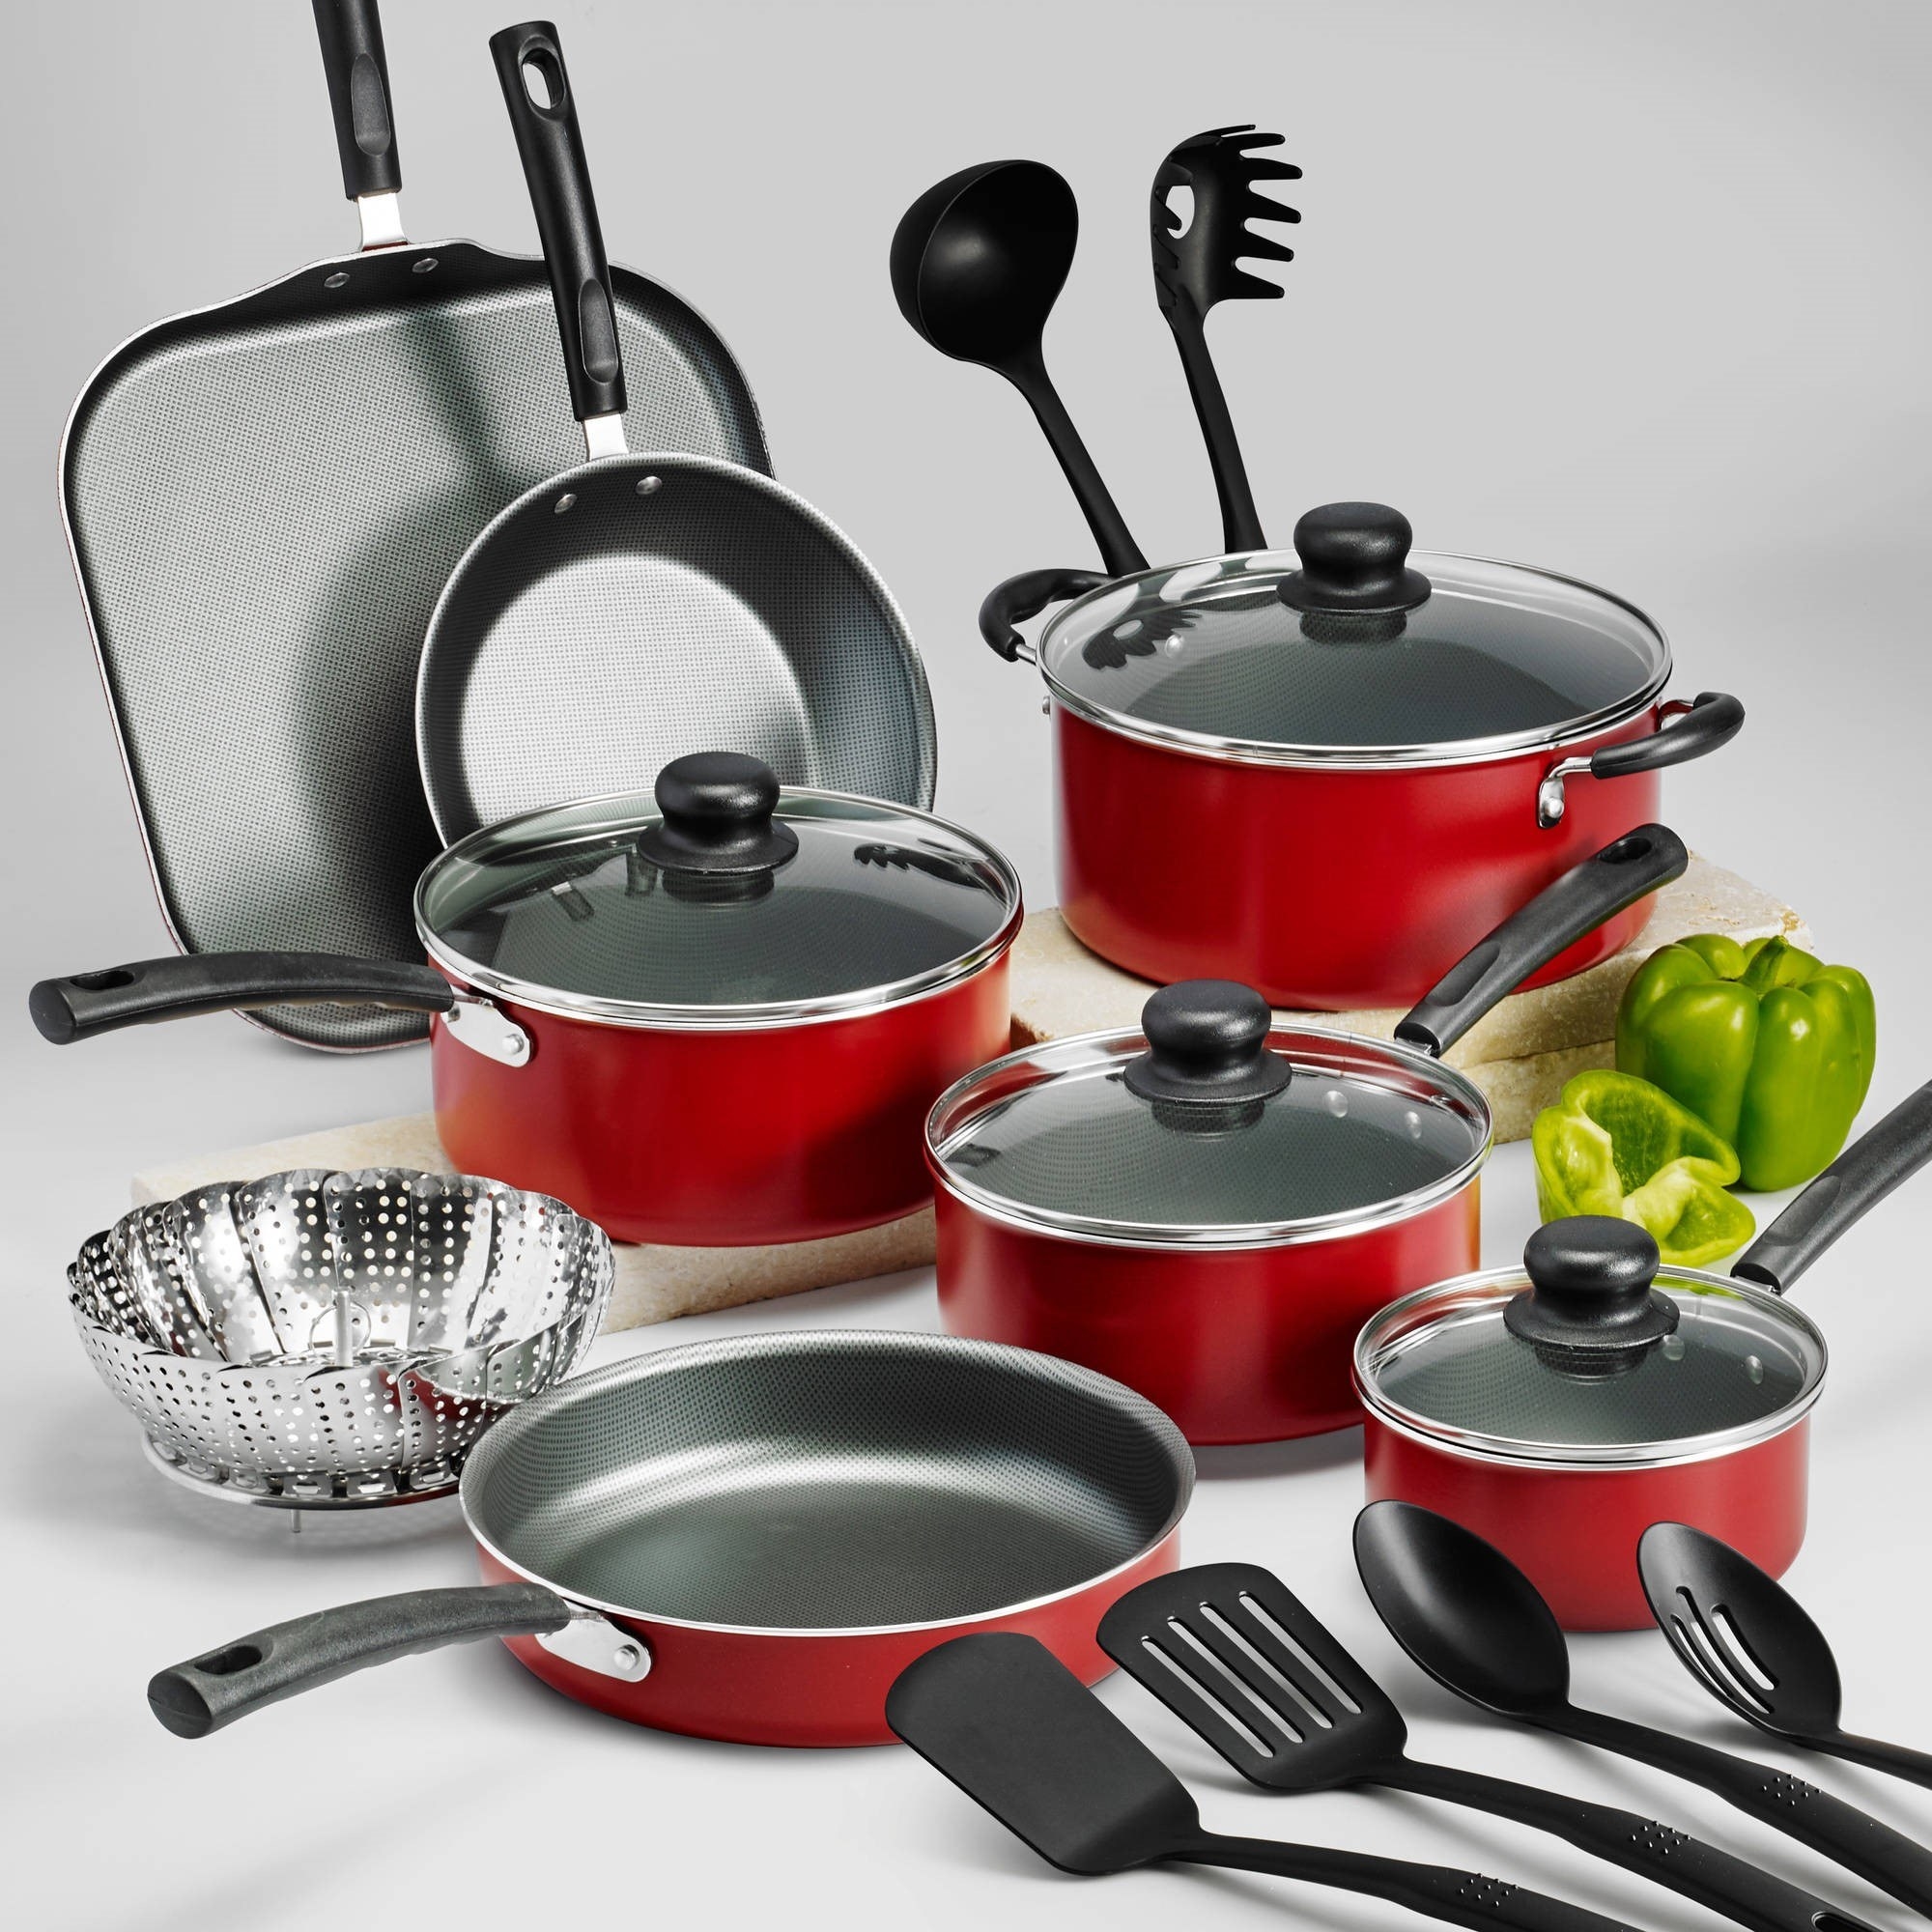 red cookware set including pots, pans, and utensils 